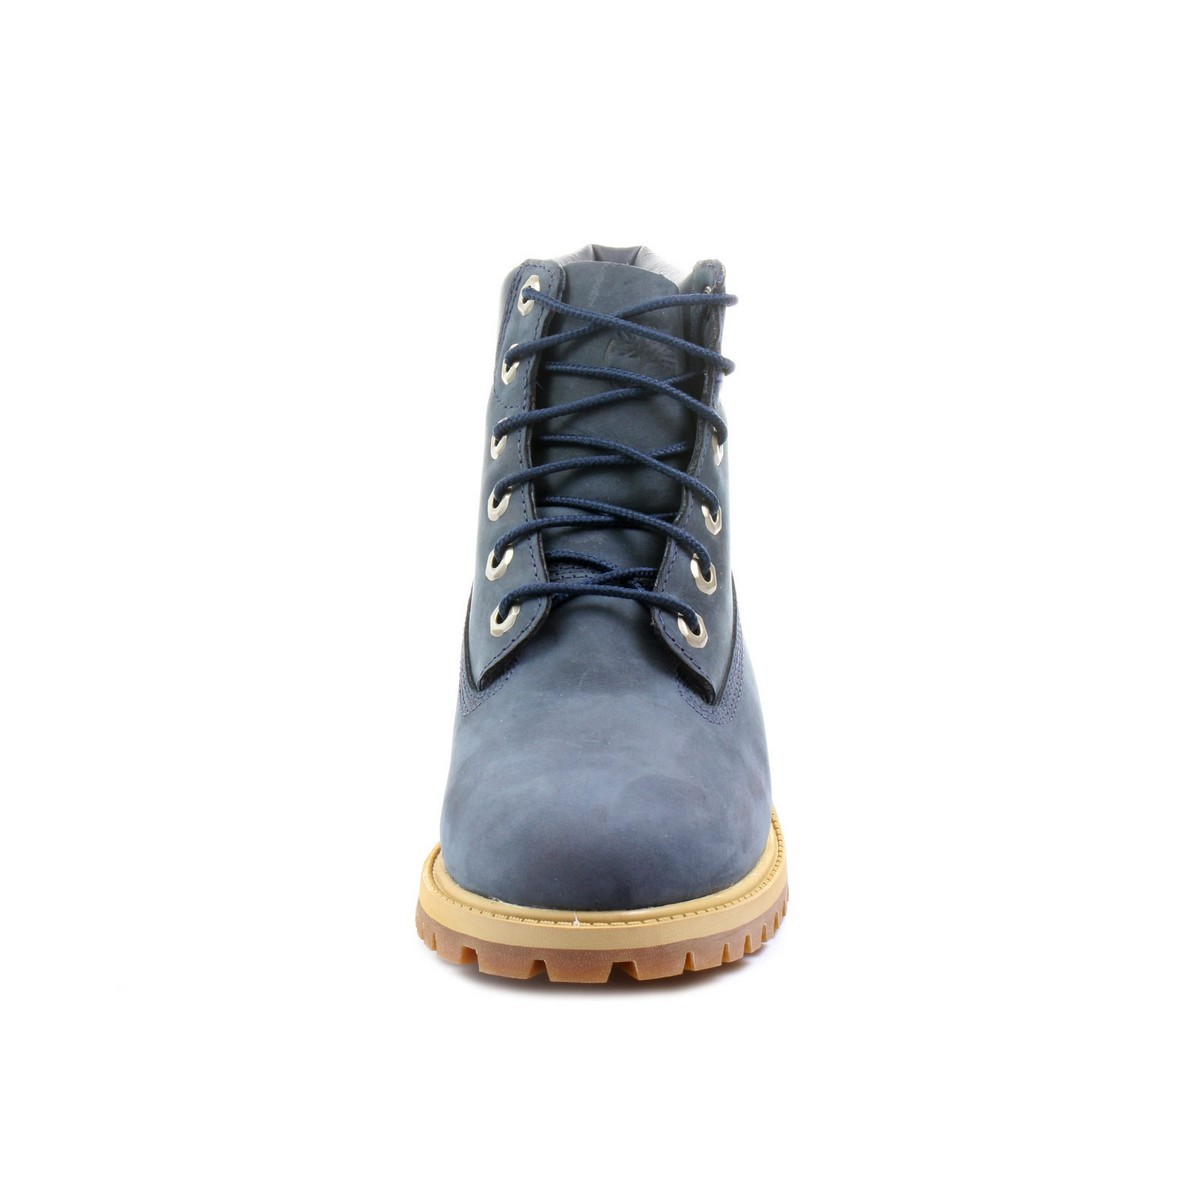 Timberland 6 IN CLASSIC BOOT 